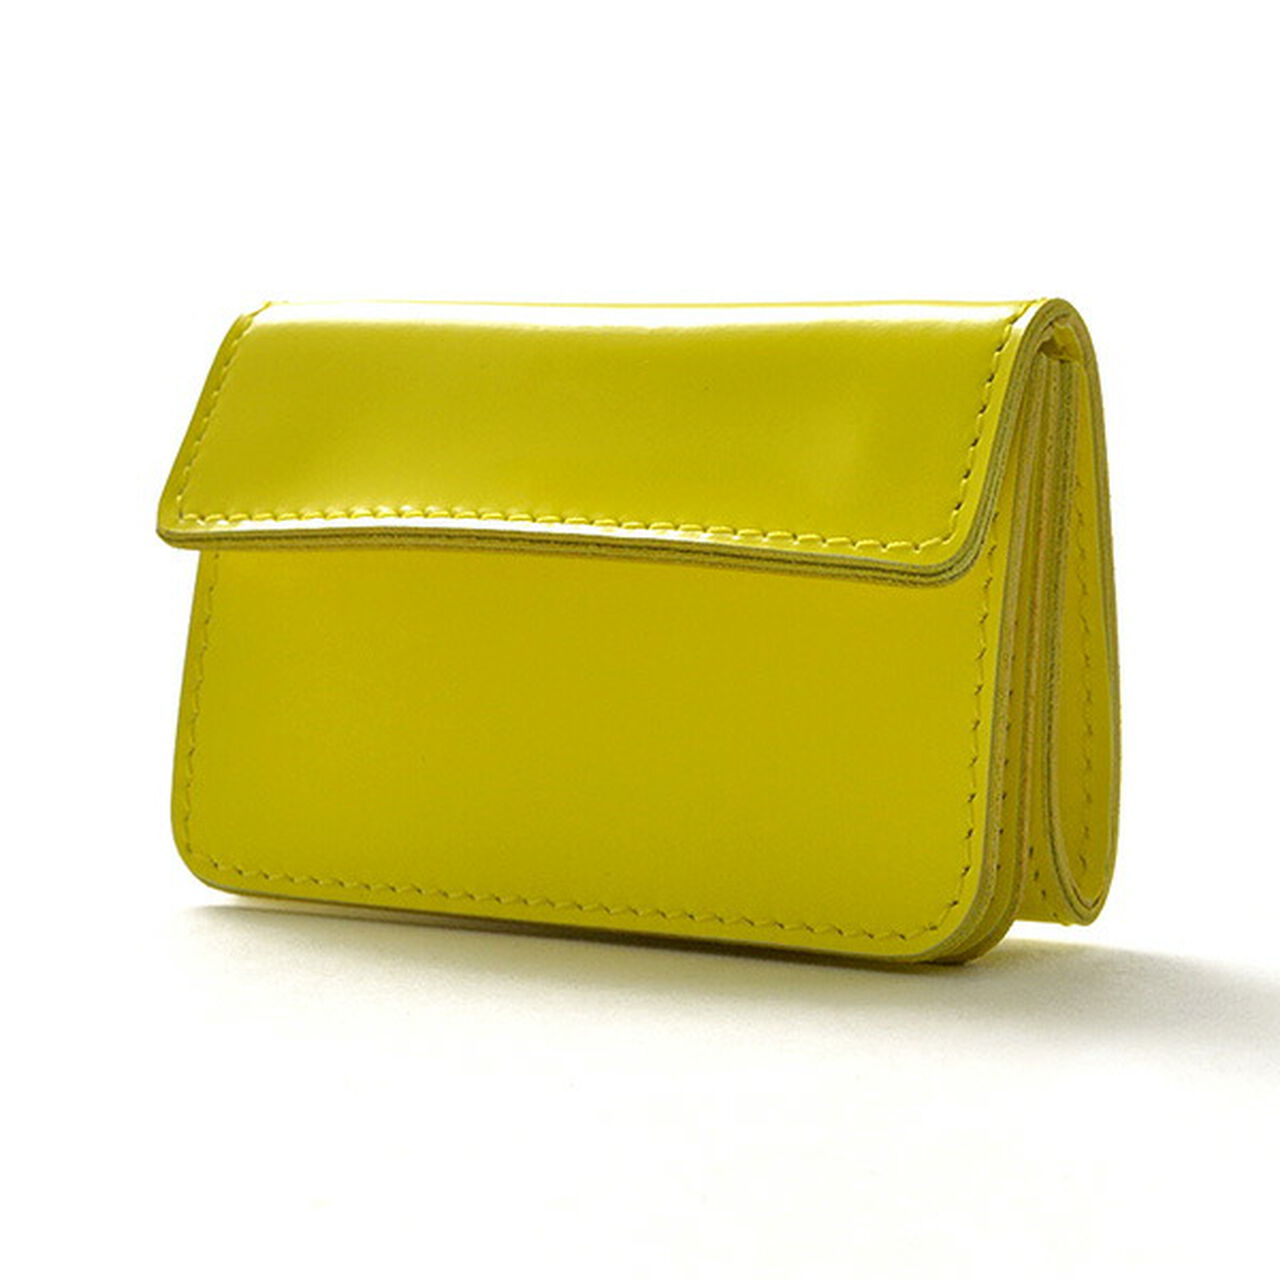 Bellows Compact Wallet,Yellow, large image number 0